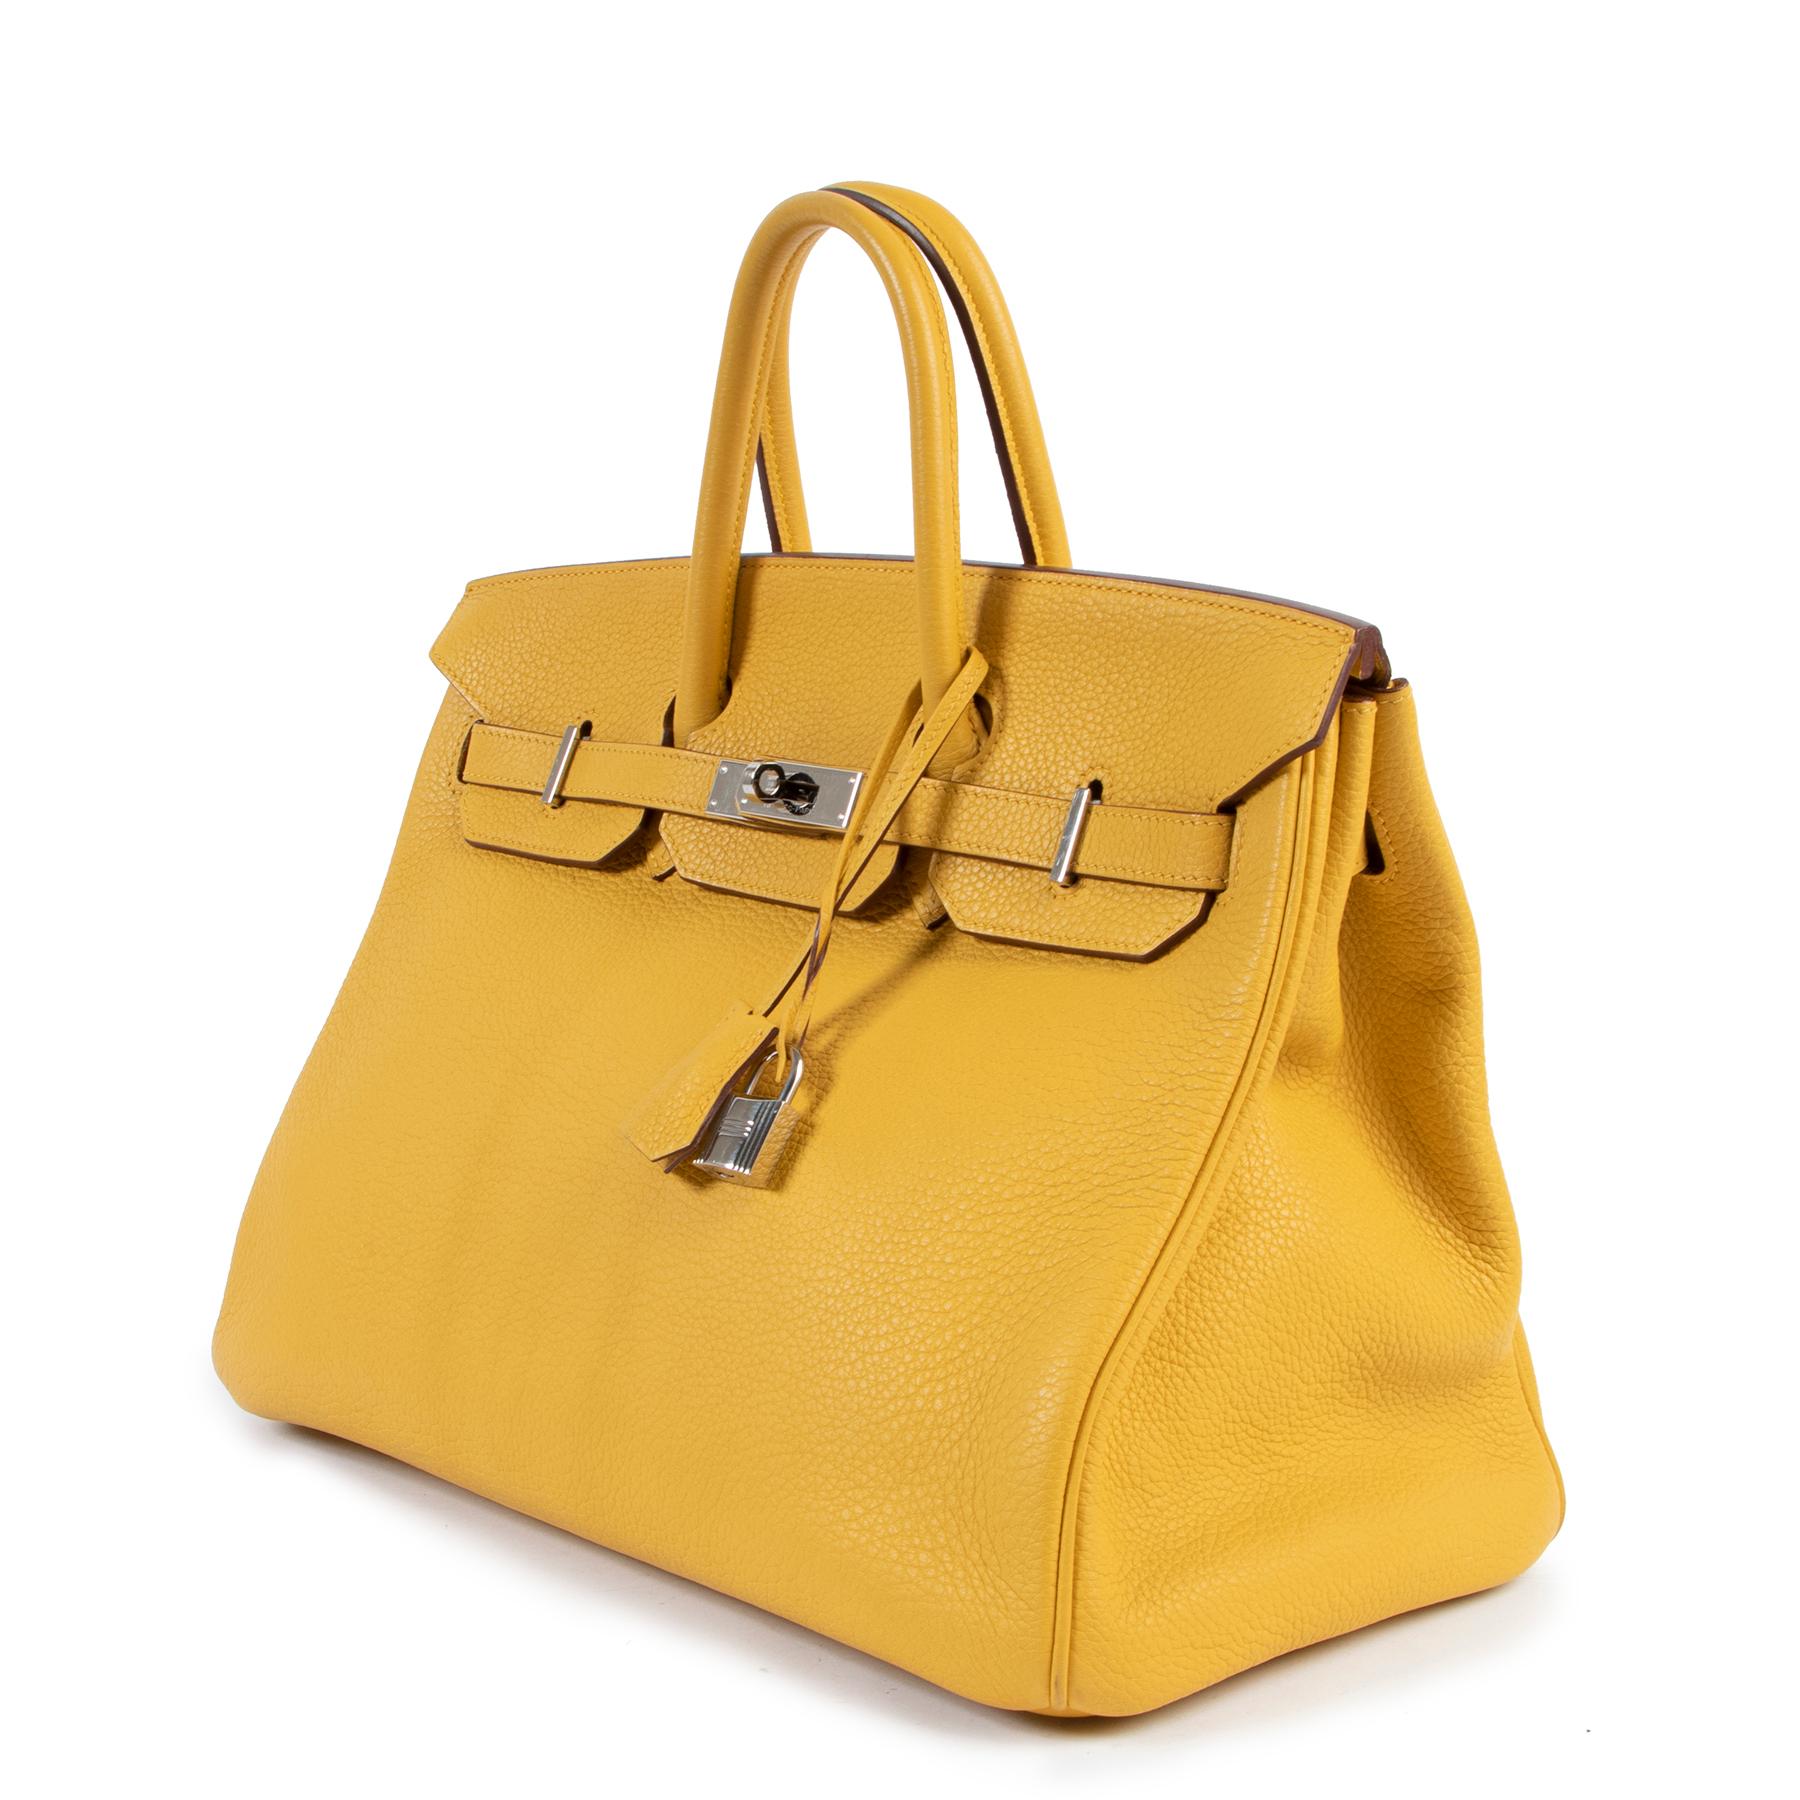 Excellent condition

Hermès Birkin 35cm Jaune Soleil Clemence Taurillon Leather PHW

Get your hands on this extremely rare classic Hermès Birkin 35cm jaune soleil.
This bag is made from Taurillon Clemence leather, which is made from bull and has a